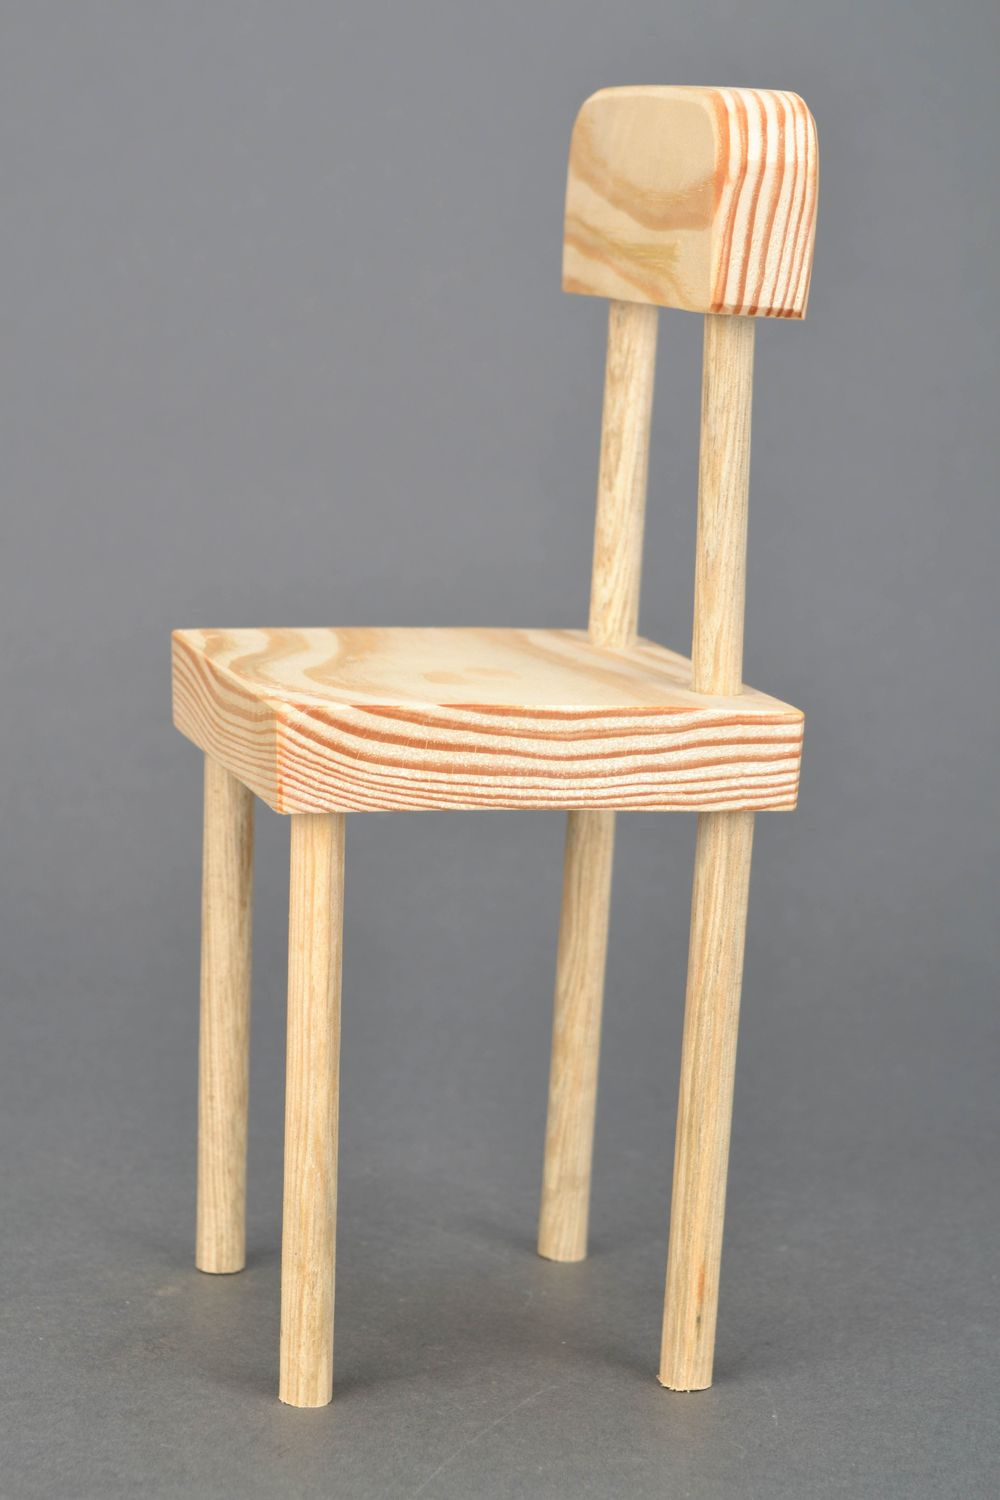 Decorative doll chair made of wood photo 4